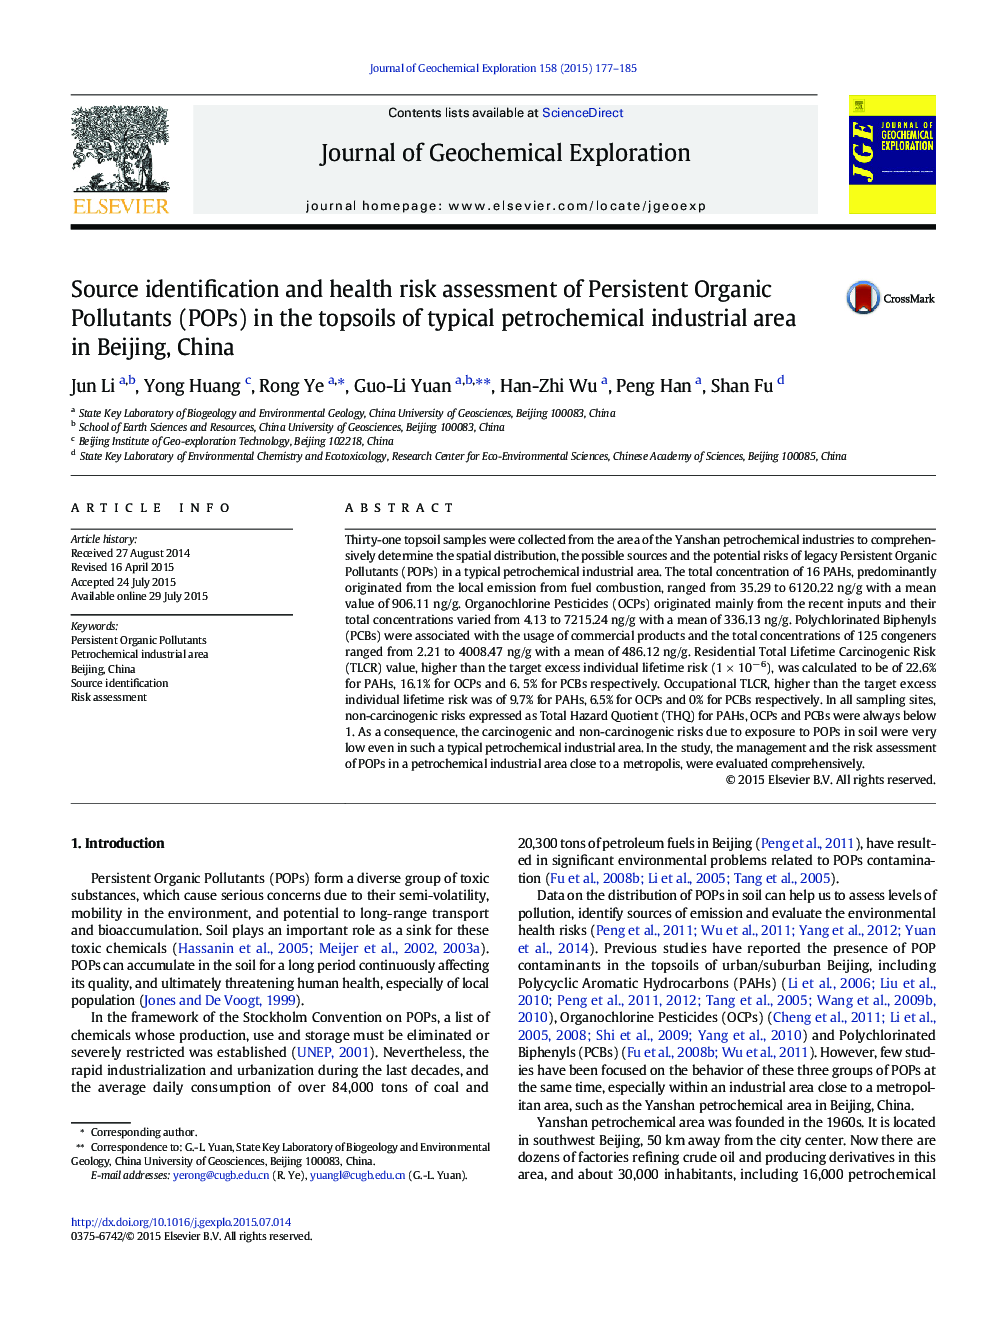 Source identification and health risk assessment of Persistent Organic Pollutants (POPs) in the topsoils of typical petrochemical industrial area in Beijing, China